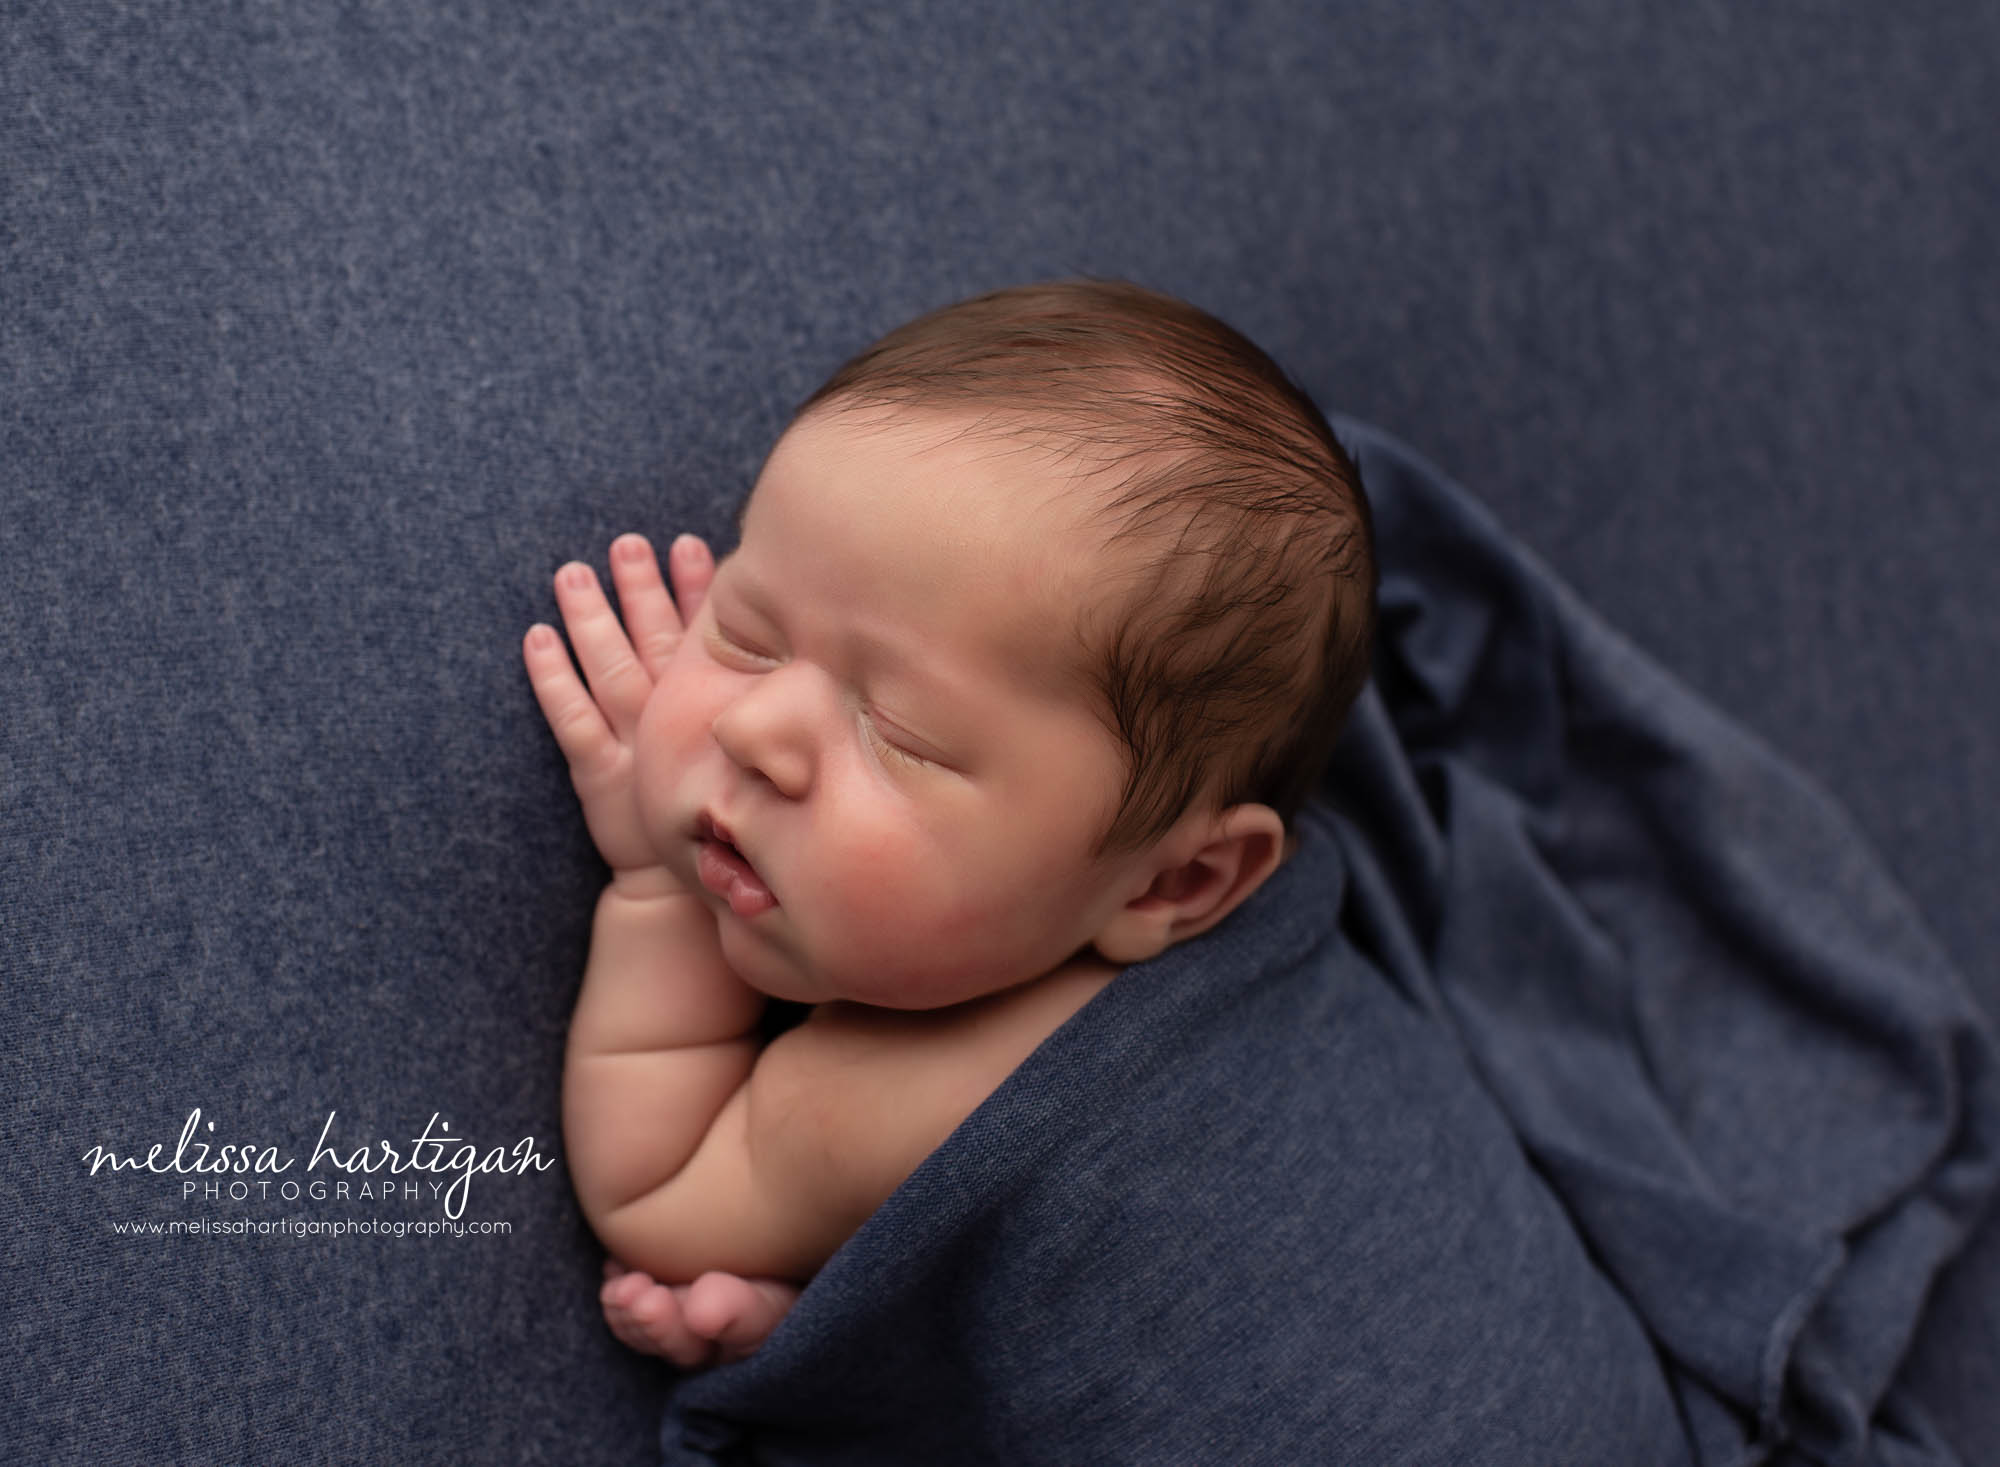 baby bou posed on blue backdrop with blue wrap covering